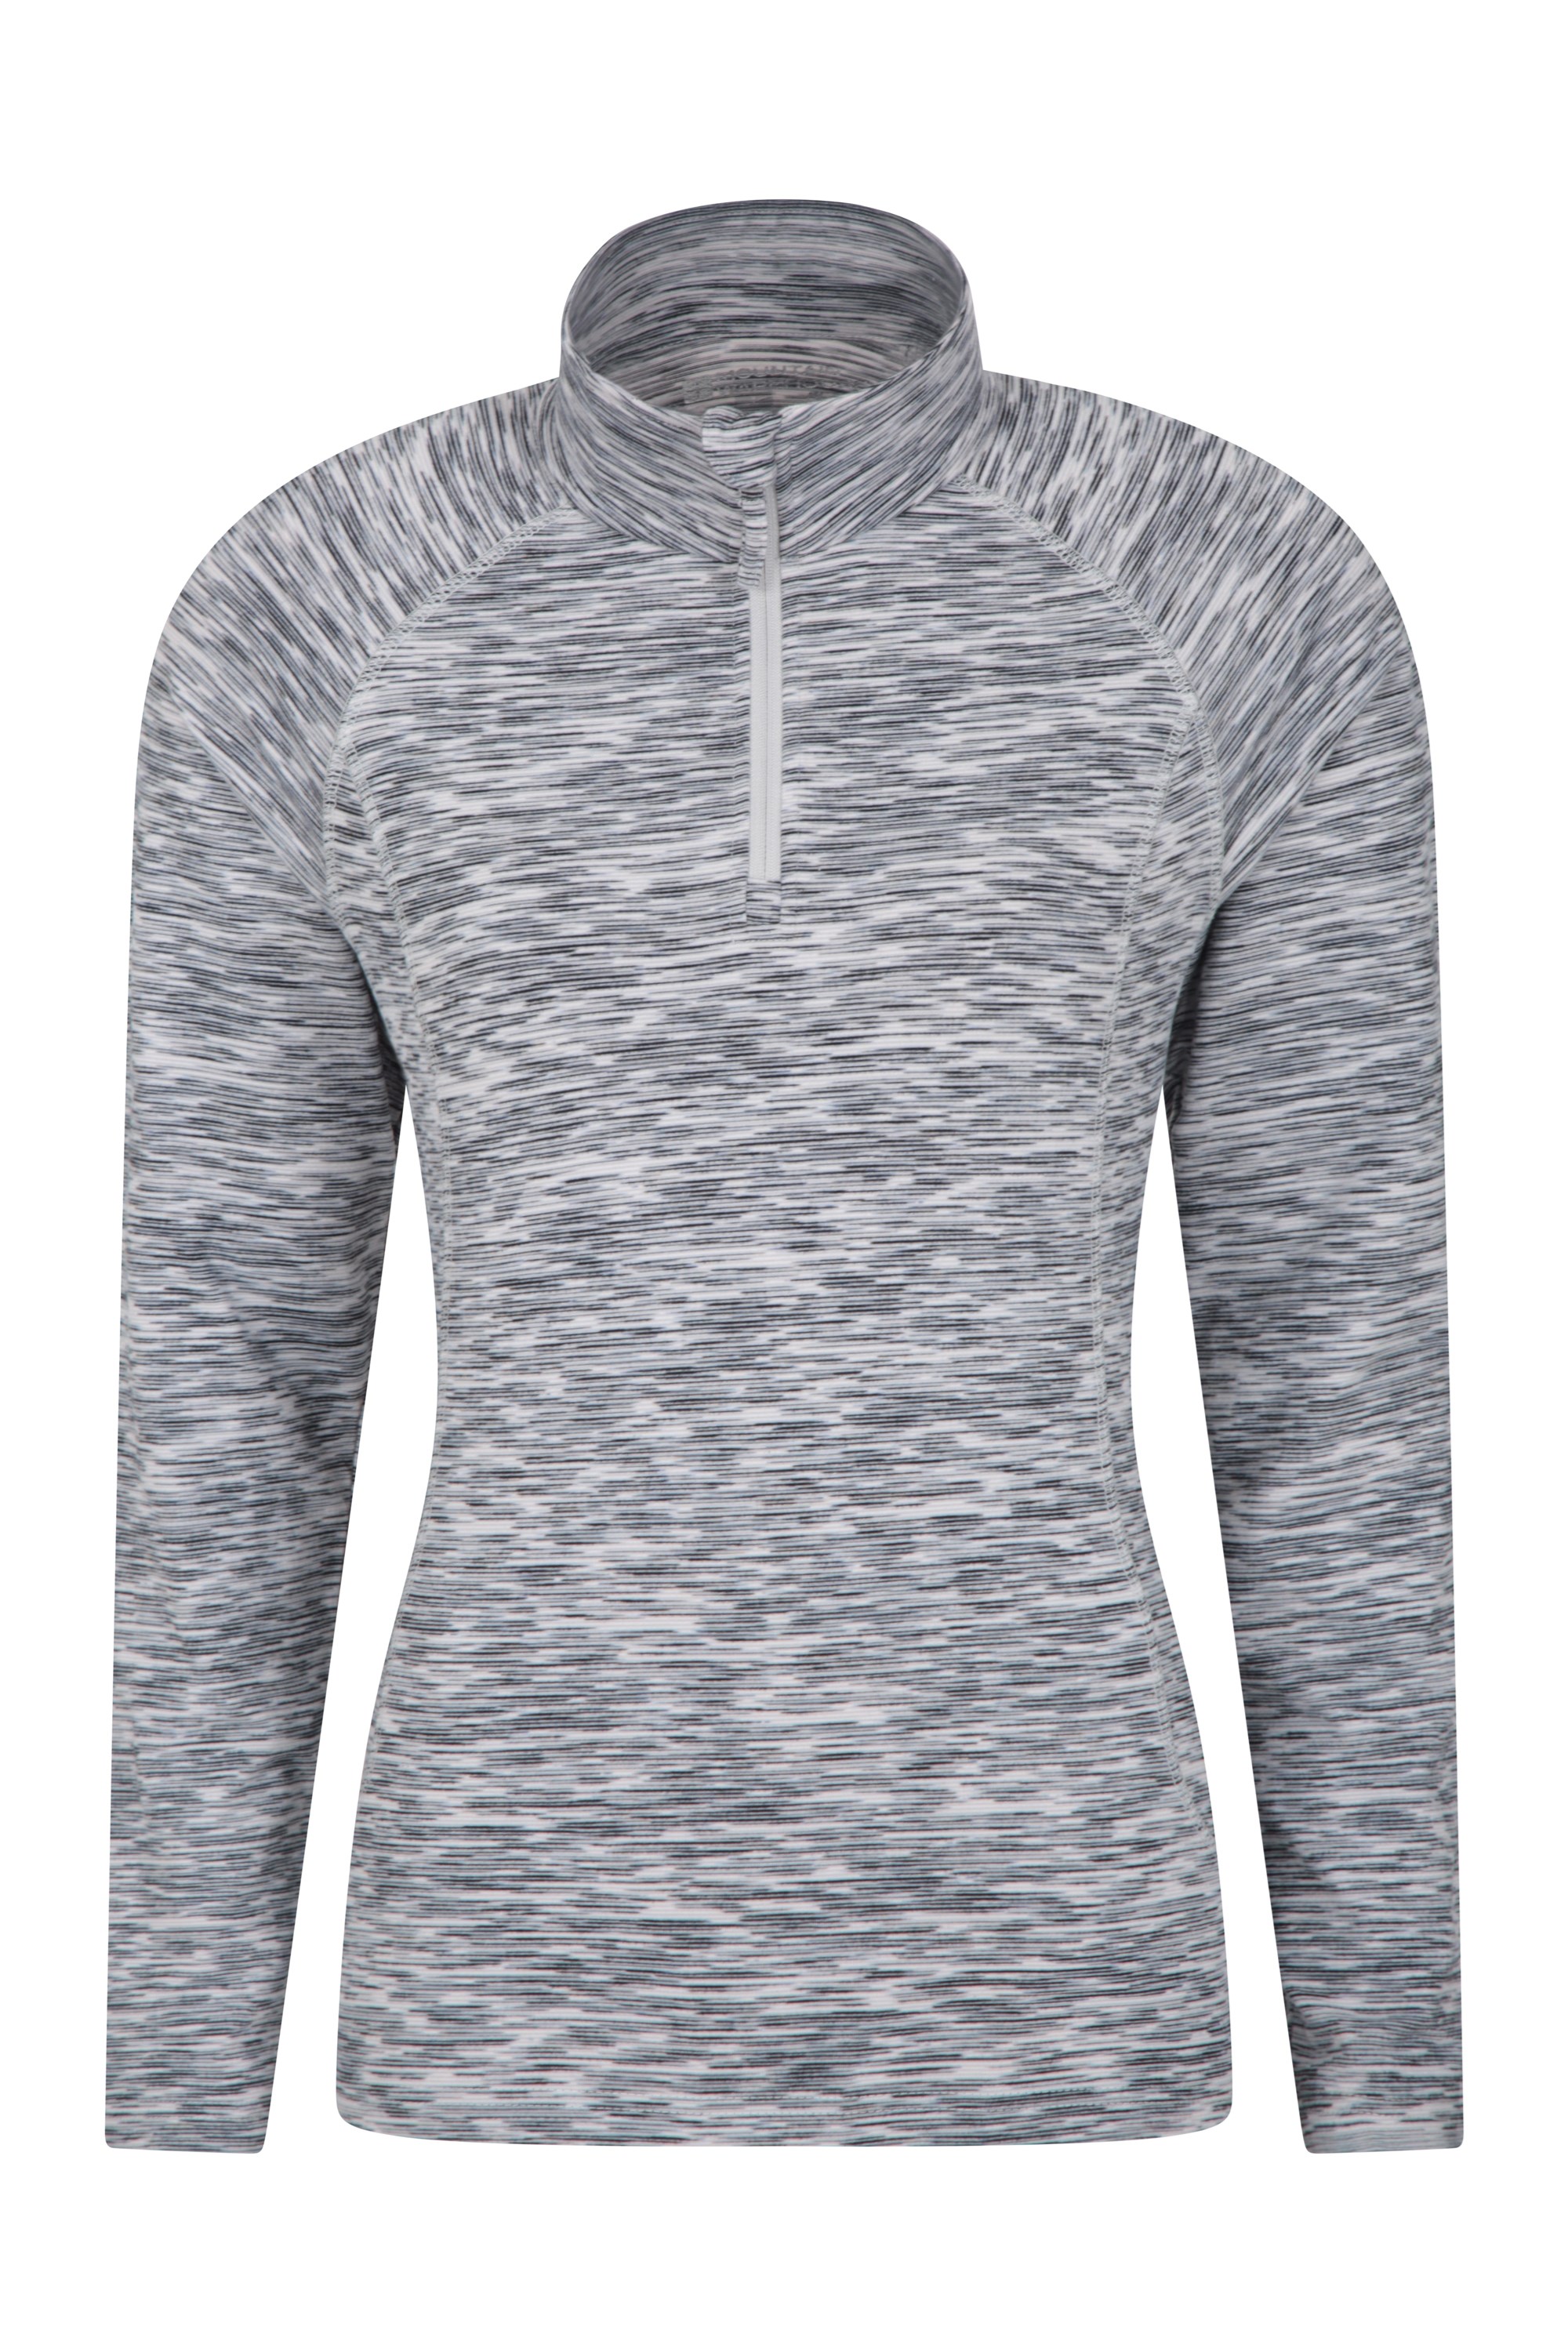 Travelling & Outdoors Gym 2 Zipped Side Pockets Best for Outdoors Warm & Cosy Jacket Mountain Warehouse Bend & Stretch Womens Full-Zip Midlayer 